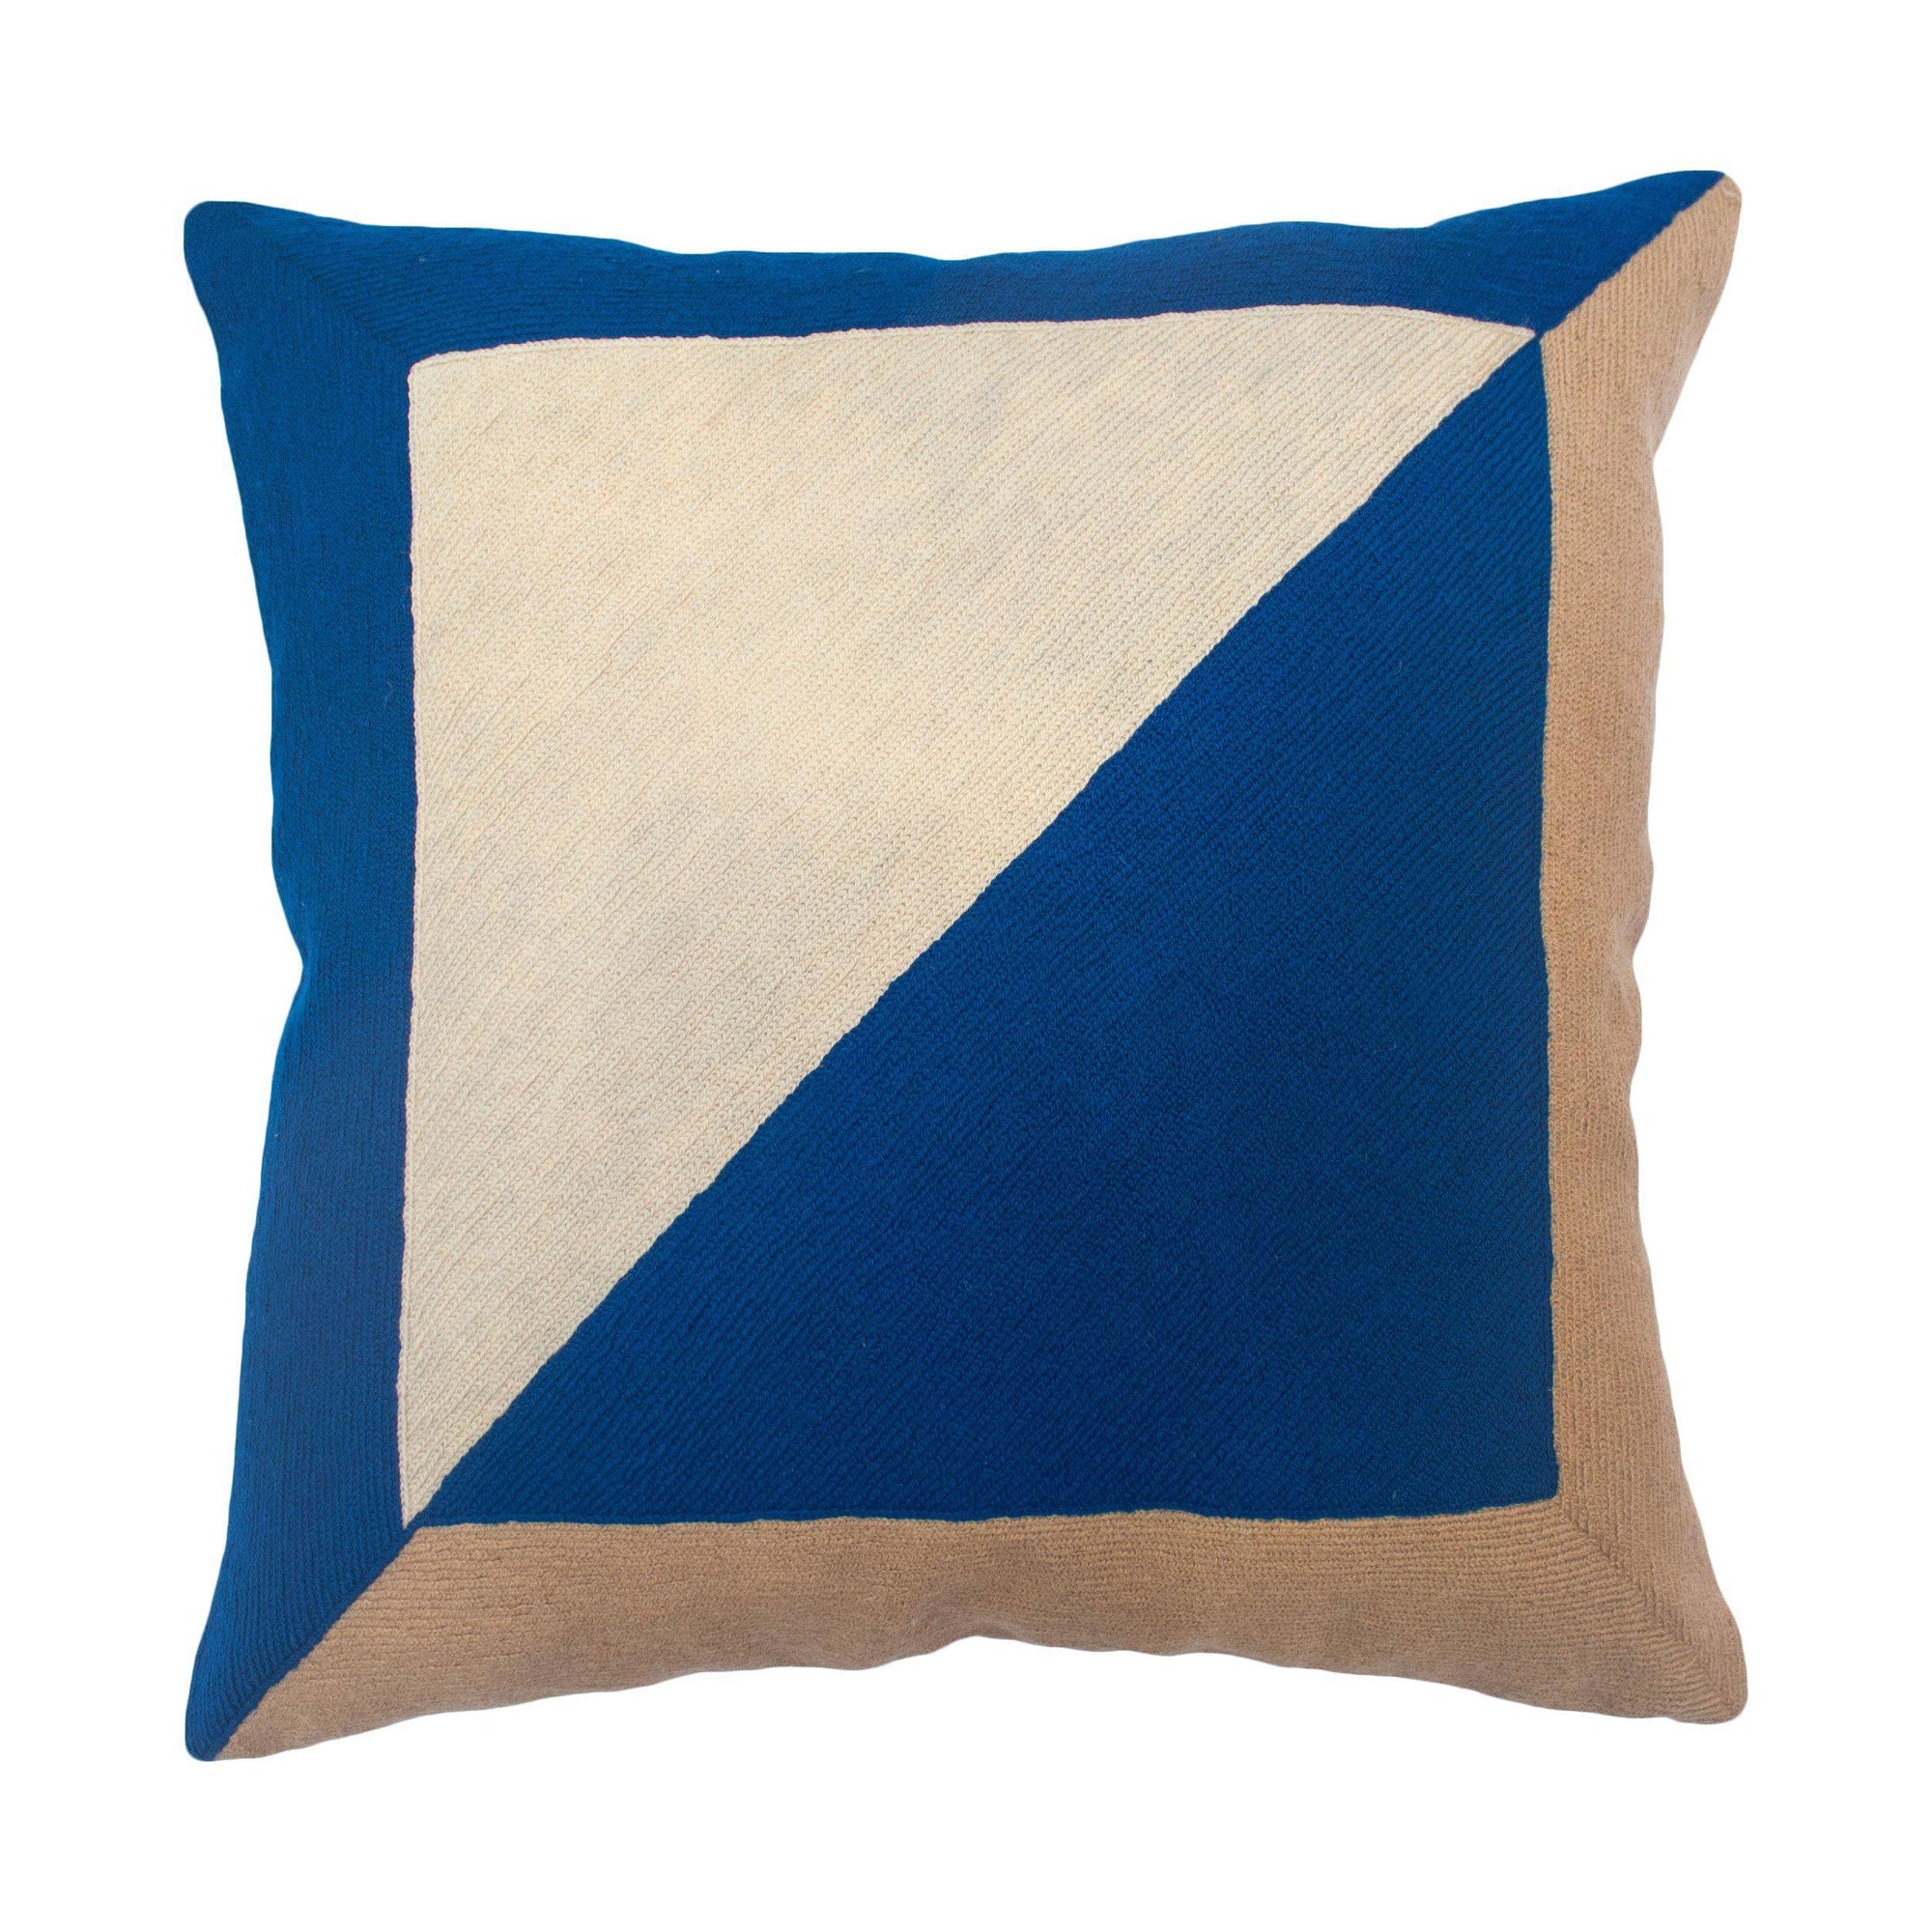 Rugs by Roo | Leah Singh Marianne Square Pillow - Blue-H17MAE10